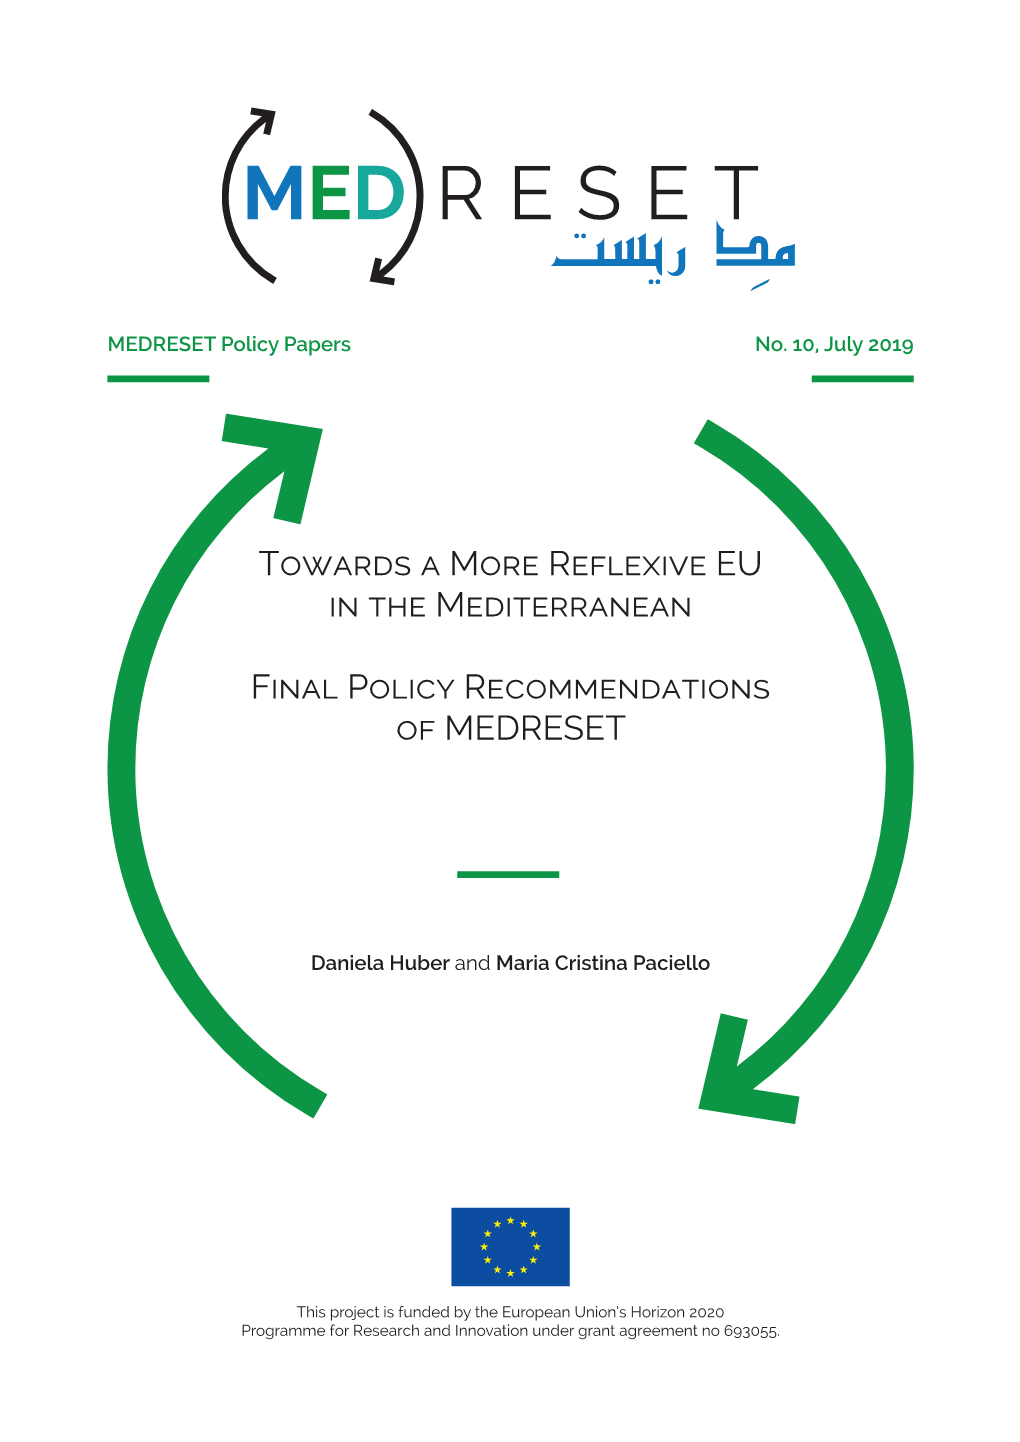 Towards a More Reflexive EU in the Mediterranean. Final Policy Recommendations of MEDRESET